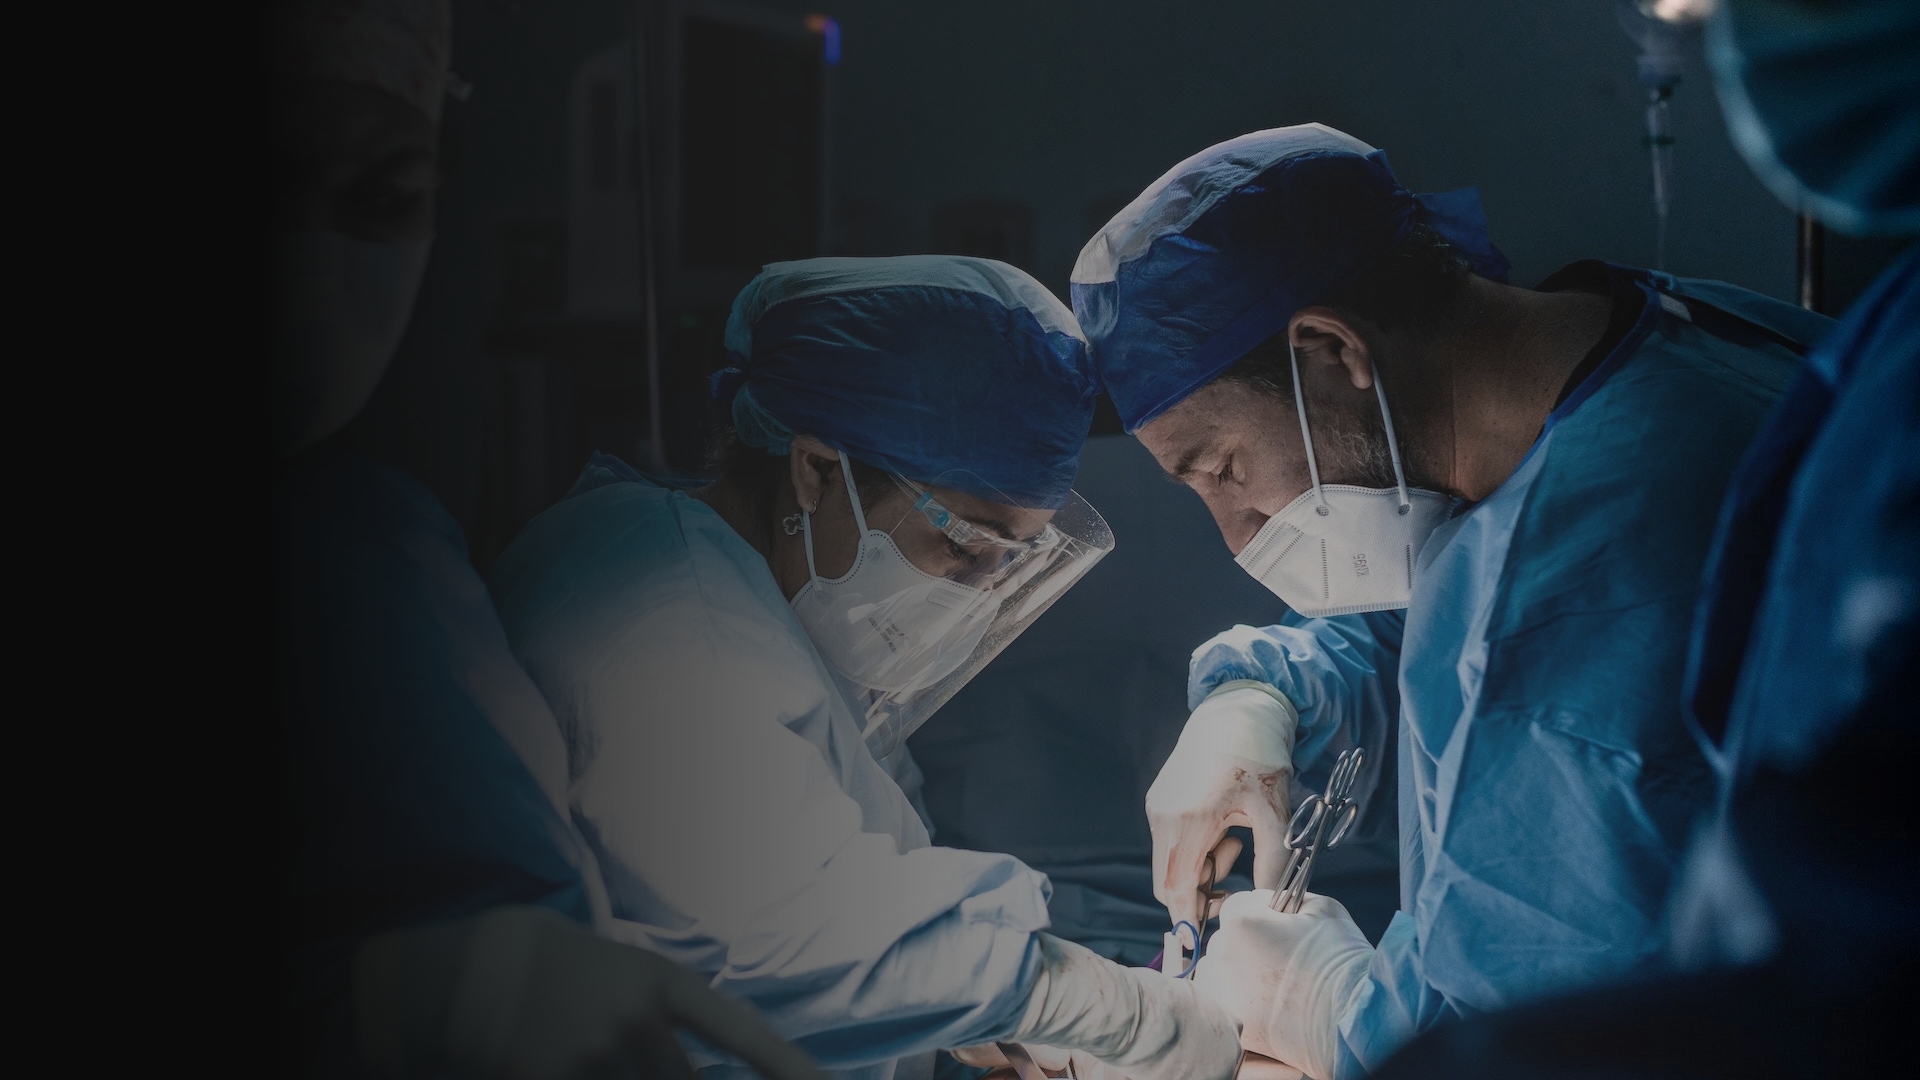 Two surgeons in an operating room, focused on a procedure, symbolizing the high-caliber professionals placed by Academic Med's executive search expertise.